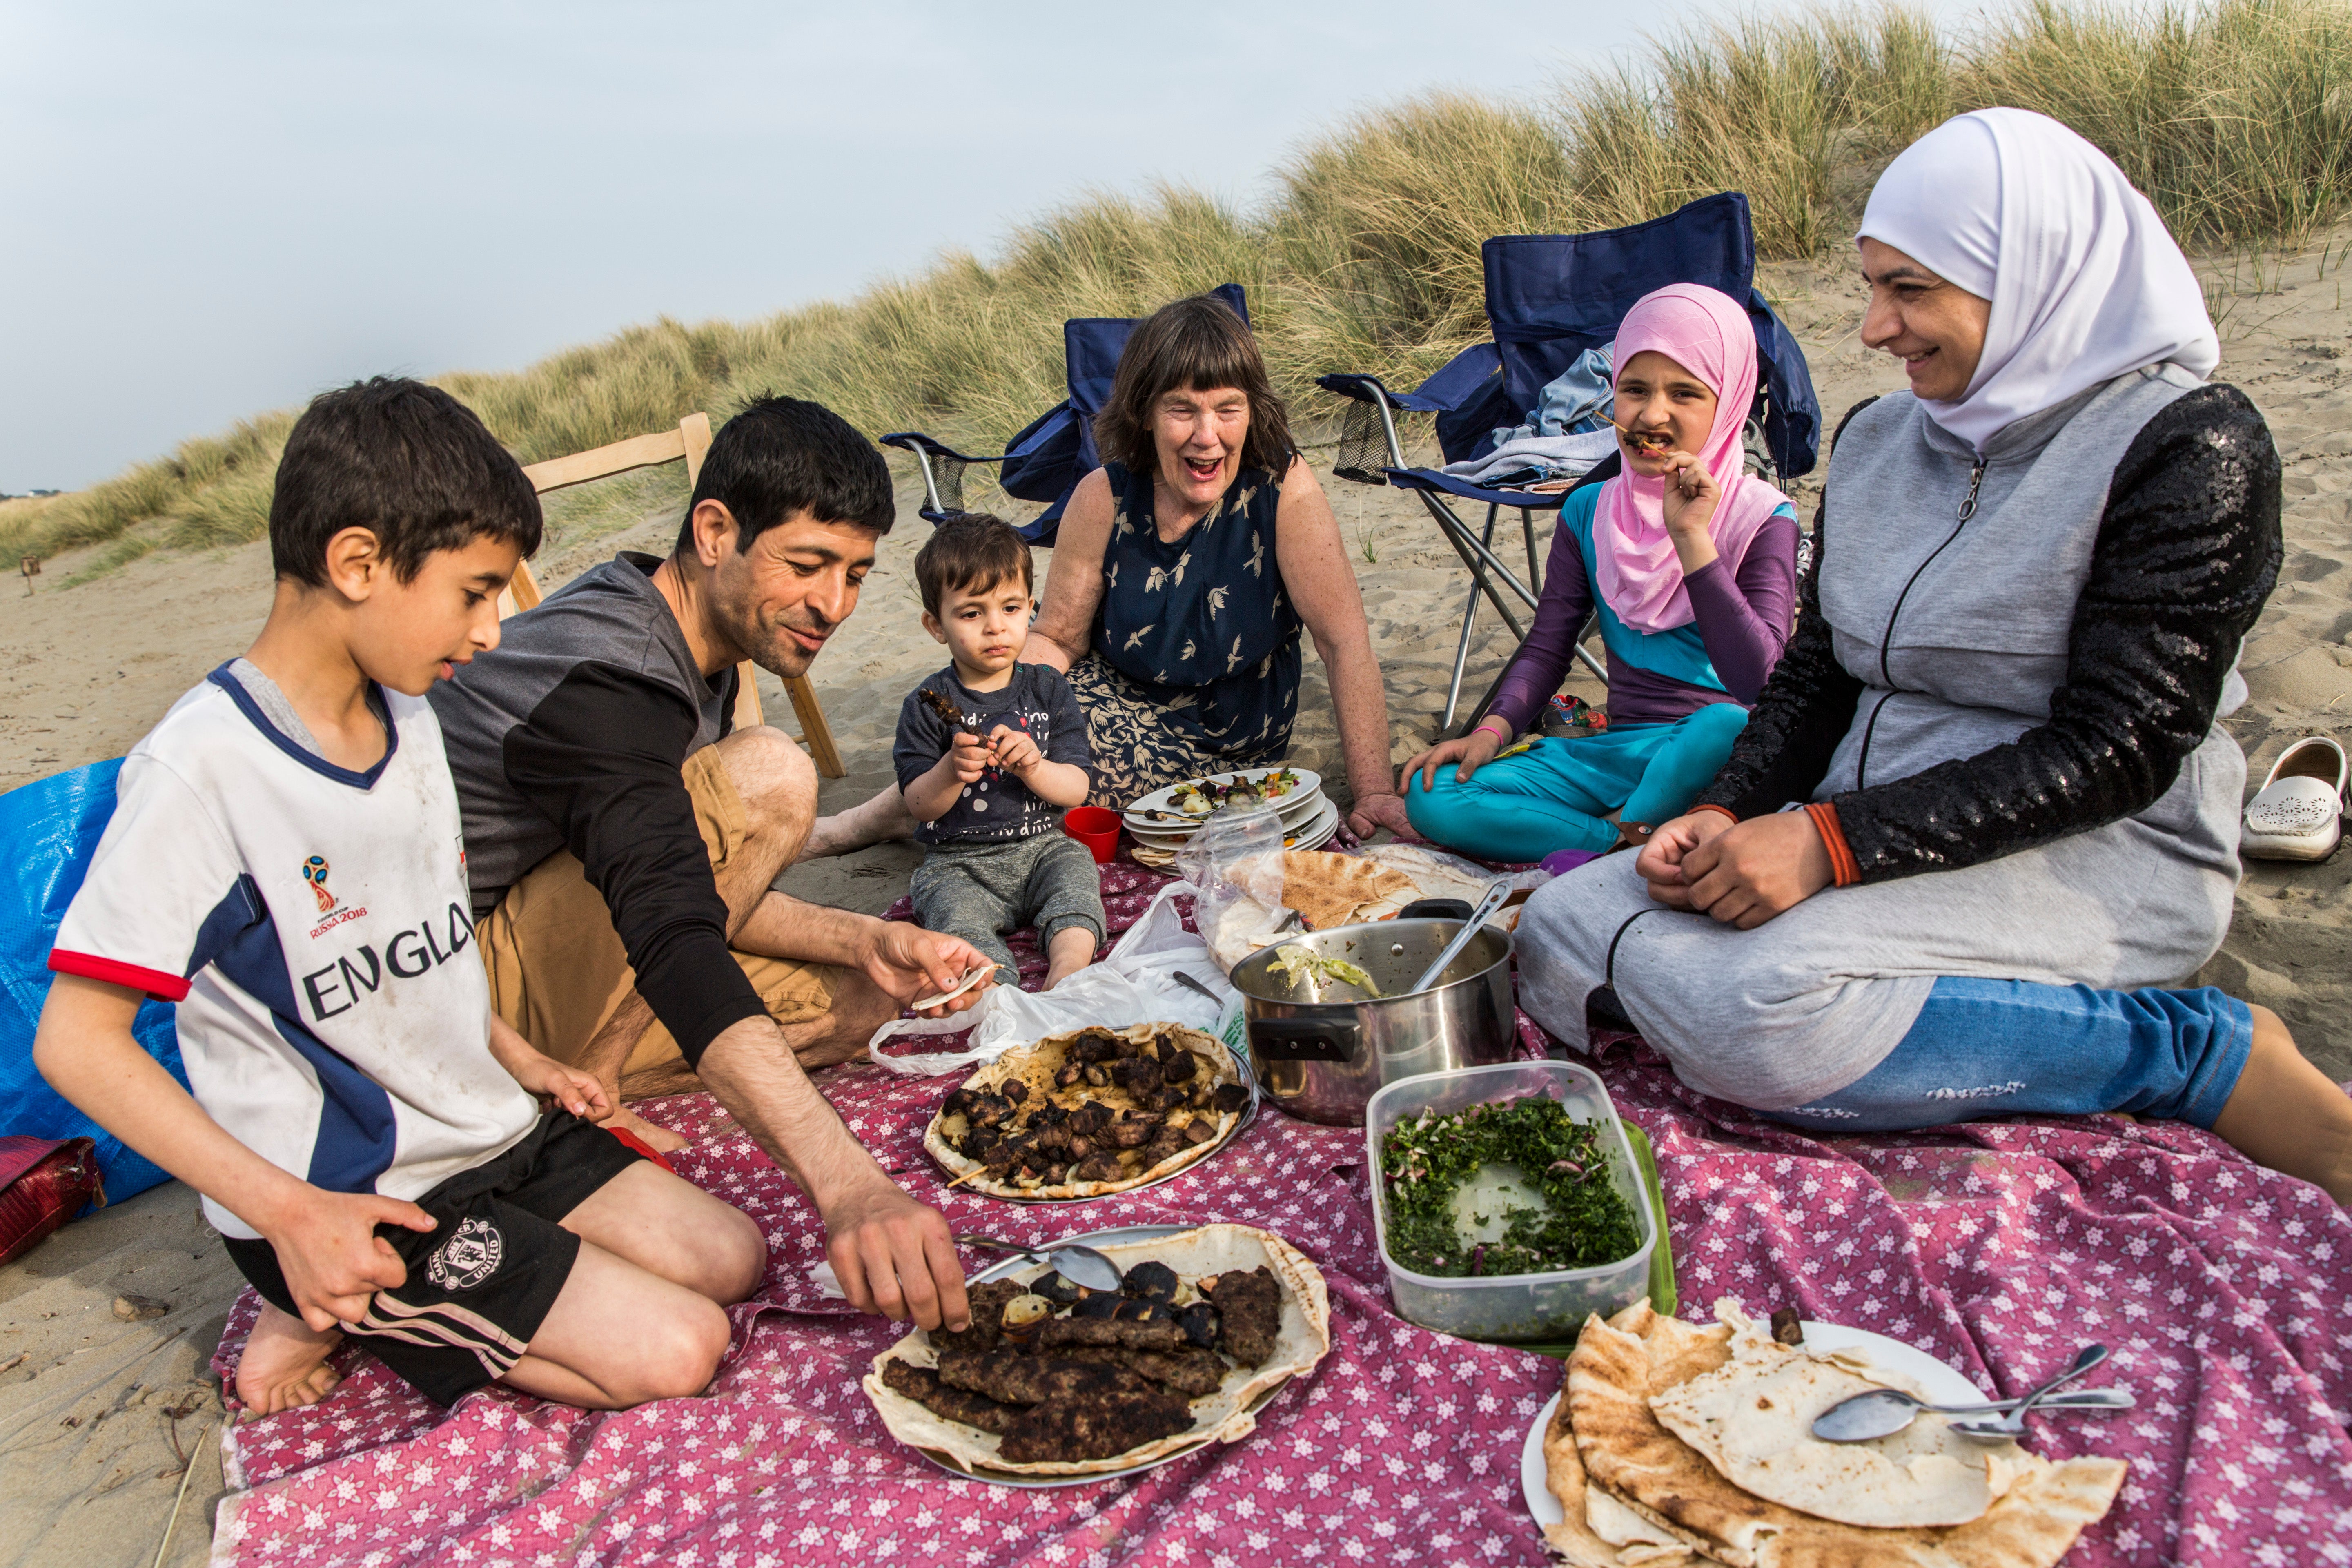 Vicky Moller (centre) has a picnic at a beach in south Wales with the Alchik family, Muhaned, his wife Naheda, and their children (from left) Shadi, 8, Hadi, 1, and Sara, 9, who fled their home during the war in Syria